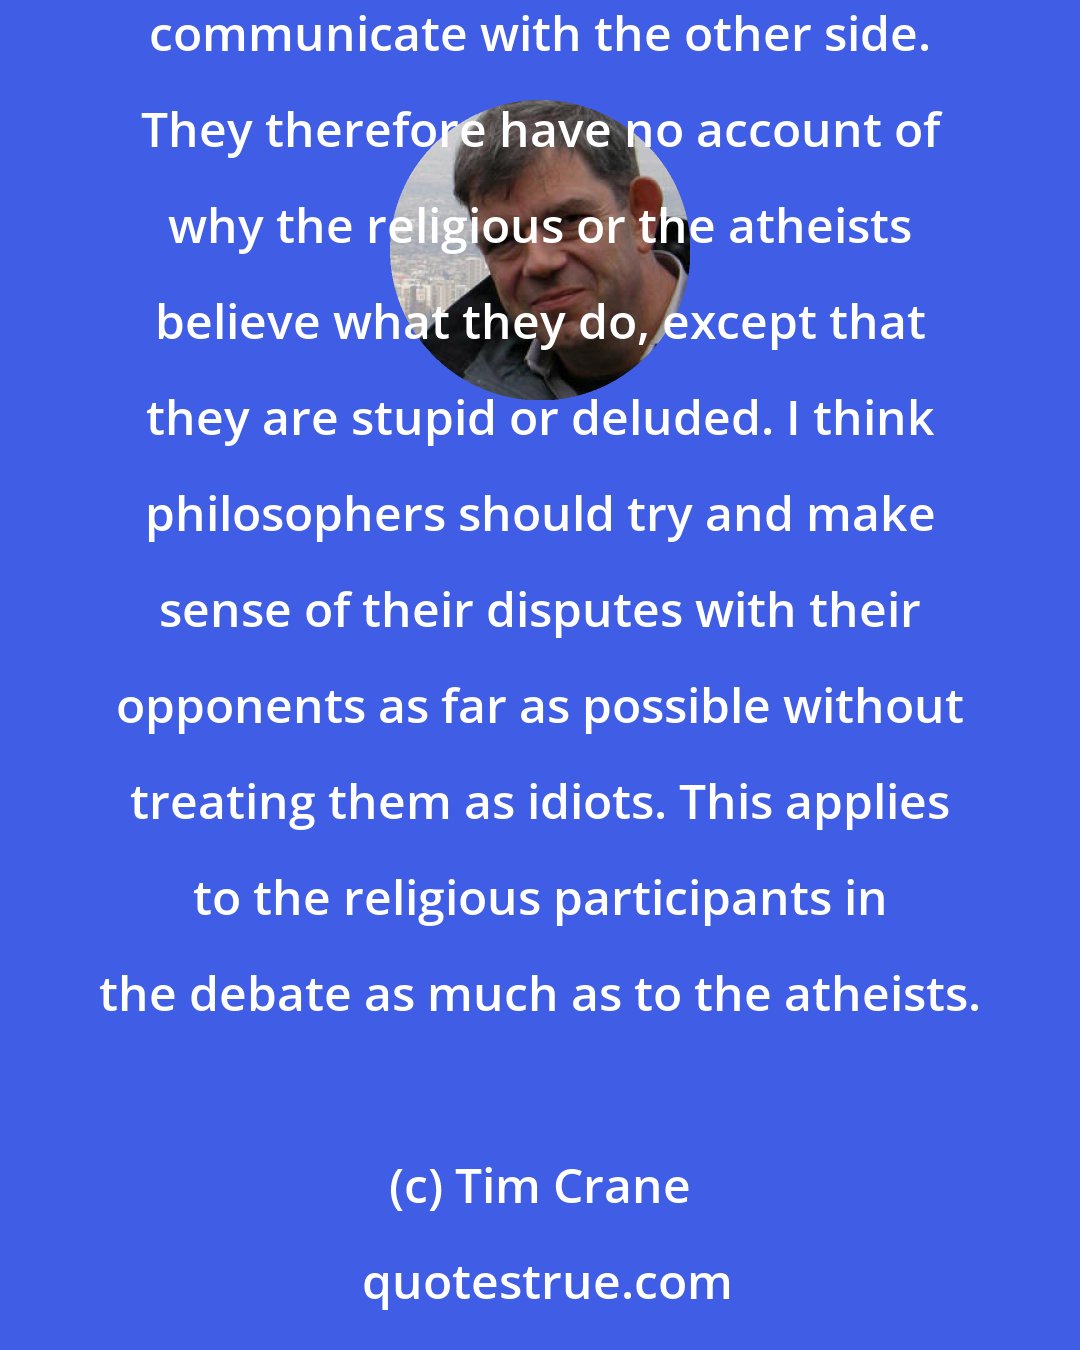 Tim Crane: One odd thing about the current debate between religious people and atheists is that the participants don't seem to care that they entirely fail to communicate with the other side. They therefore have no account of why the religious or the atheists believe what they do, except that they are stupid or deluded. I think philosophers should try and make sense of their disputes with their opponents as far as possible without treating them as idiots. This applies to the religious participants in the debate as much as to the atheists.